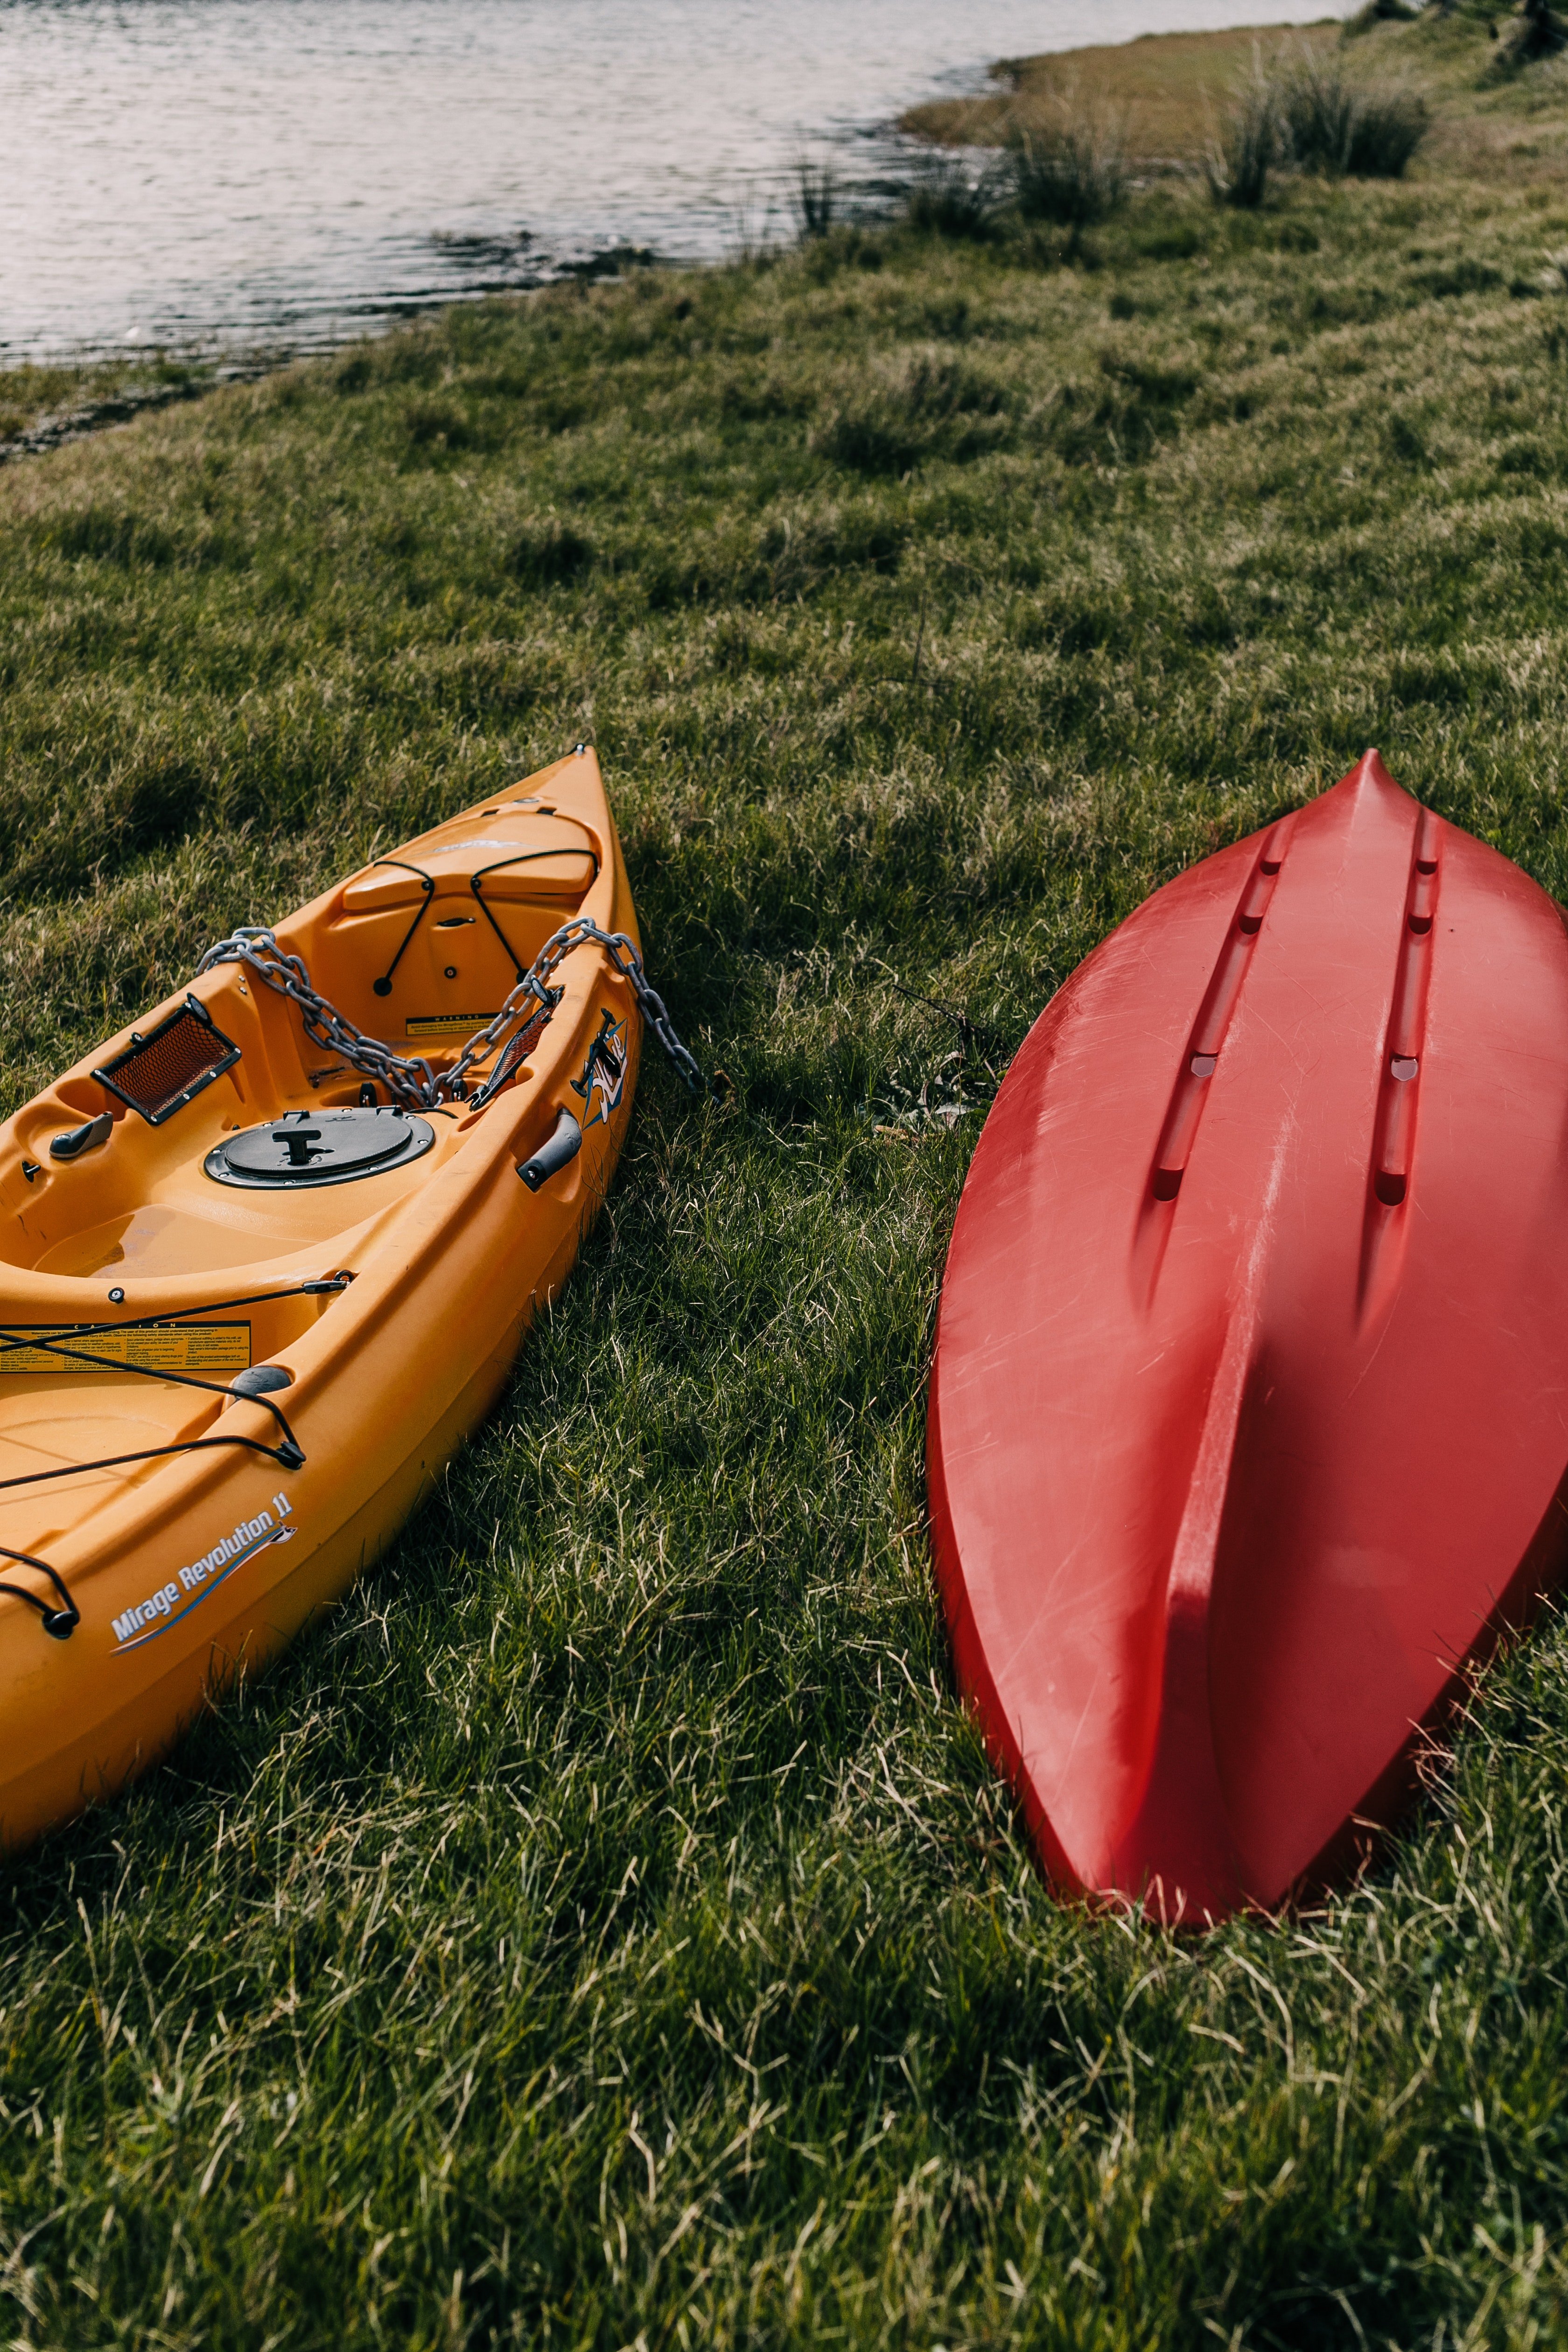 A red and yellow canoe lying on the grass. | Photo: pexels